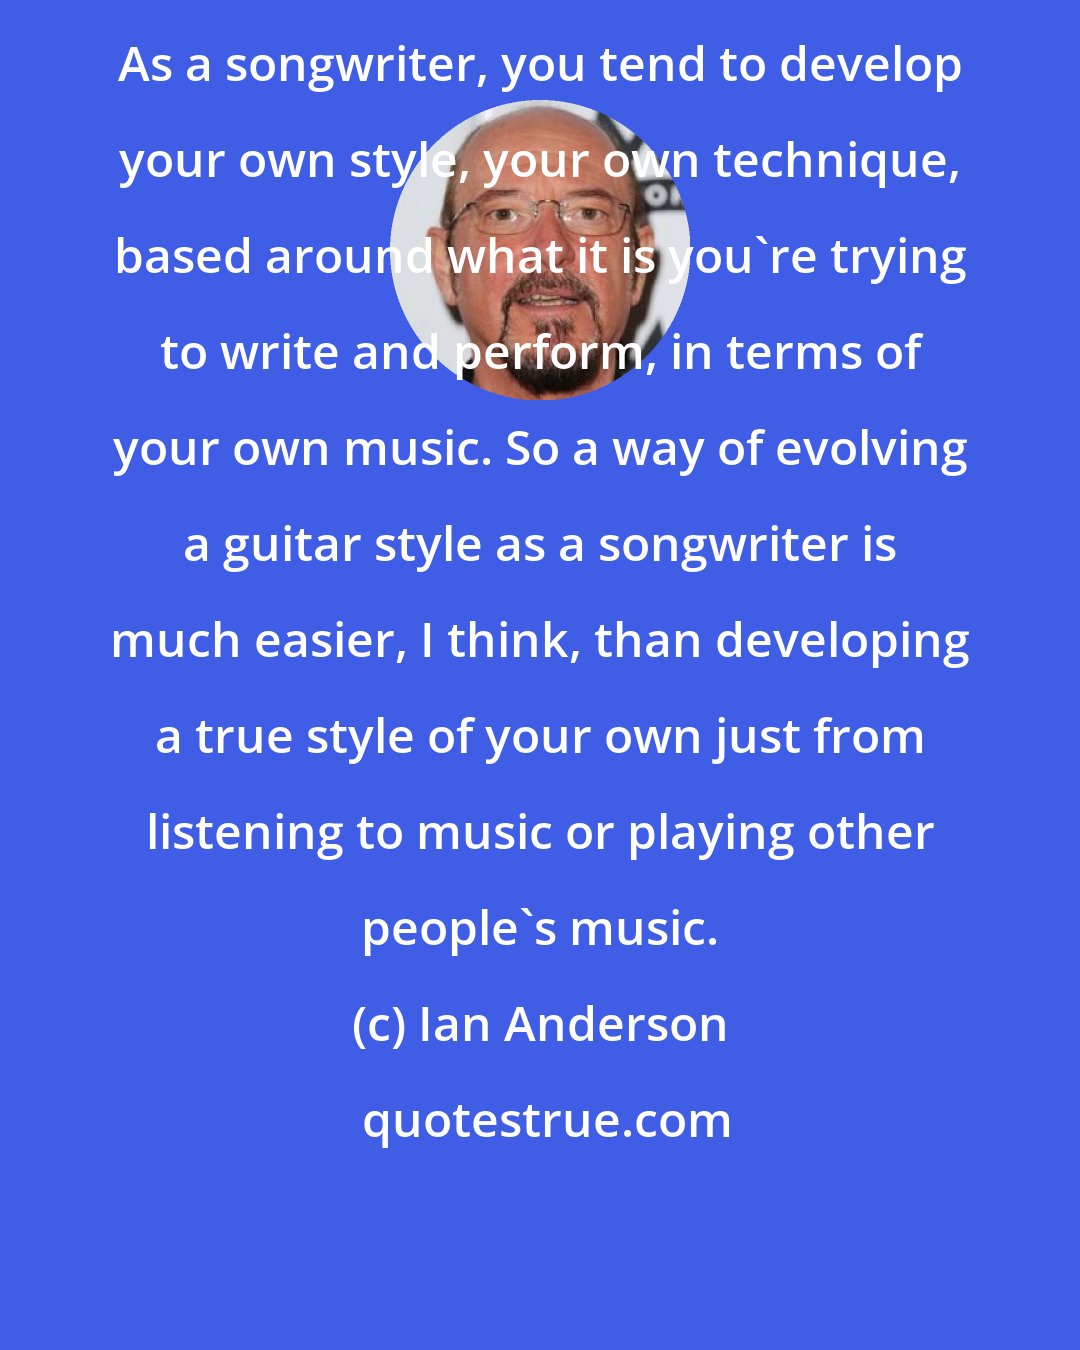 Ian Anderson: As a songwriter, you tend to develop your own style, your own technique, based around what it is you're trying to write and perform, in terms of your own music. So a way of evolving a guitar style as a songwriter is much easier, I think, than developing a true style of your own just from listening to music or playing other people's music.